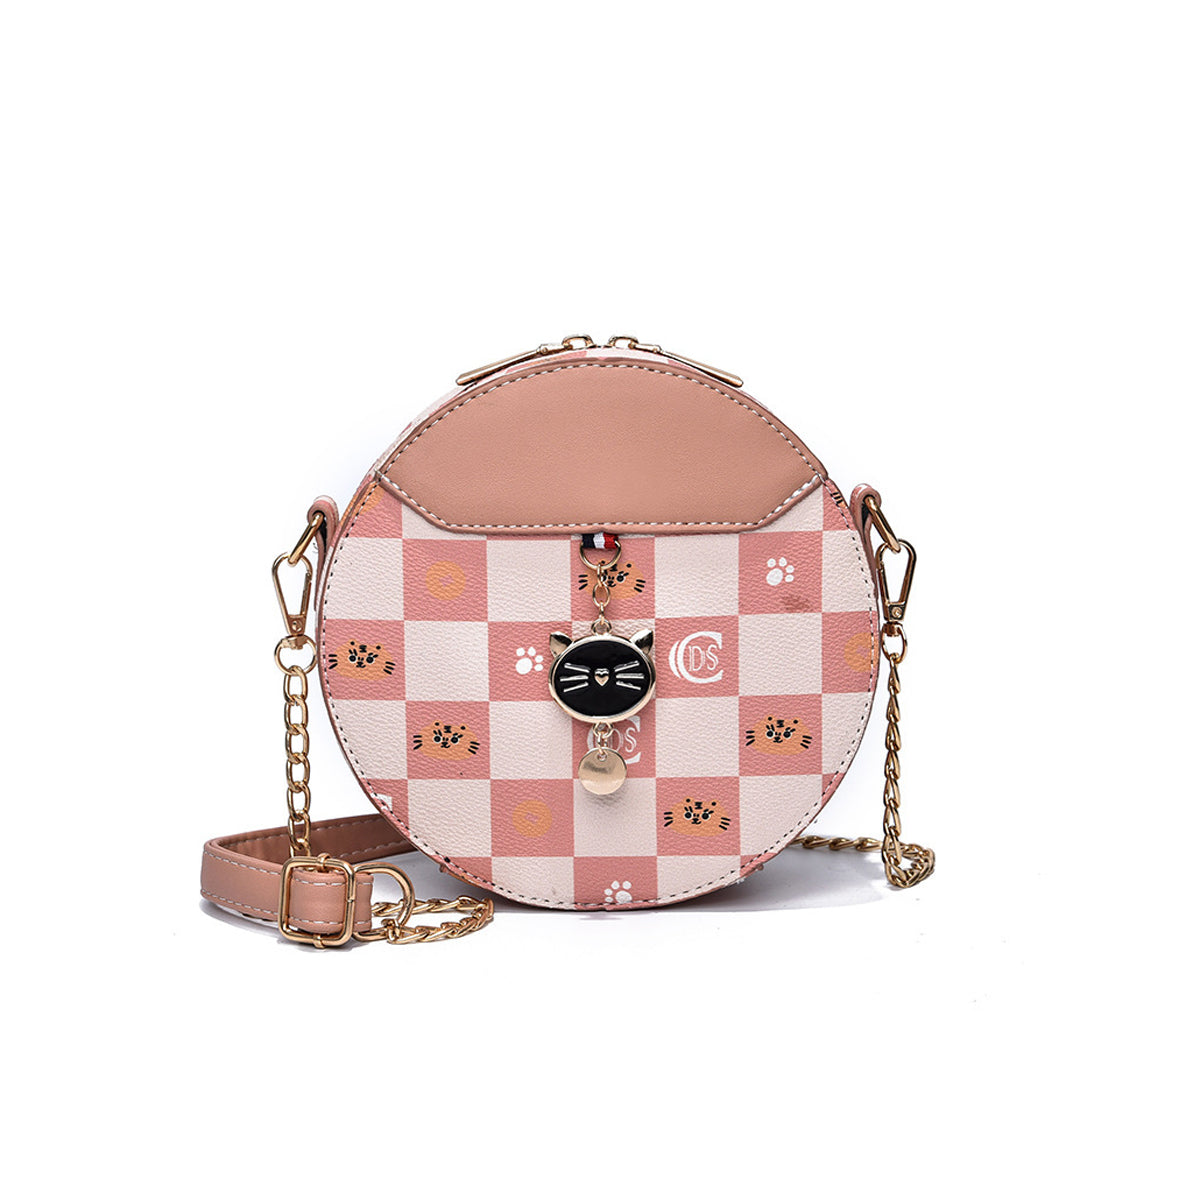 New Women's Bag Shoulder Bag Chain Small Round Bag